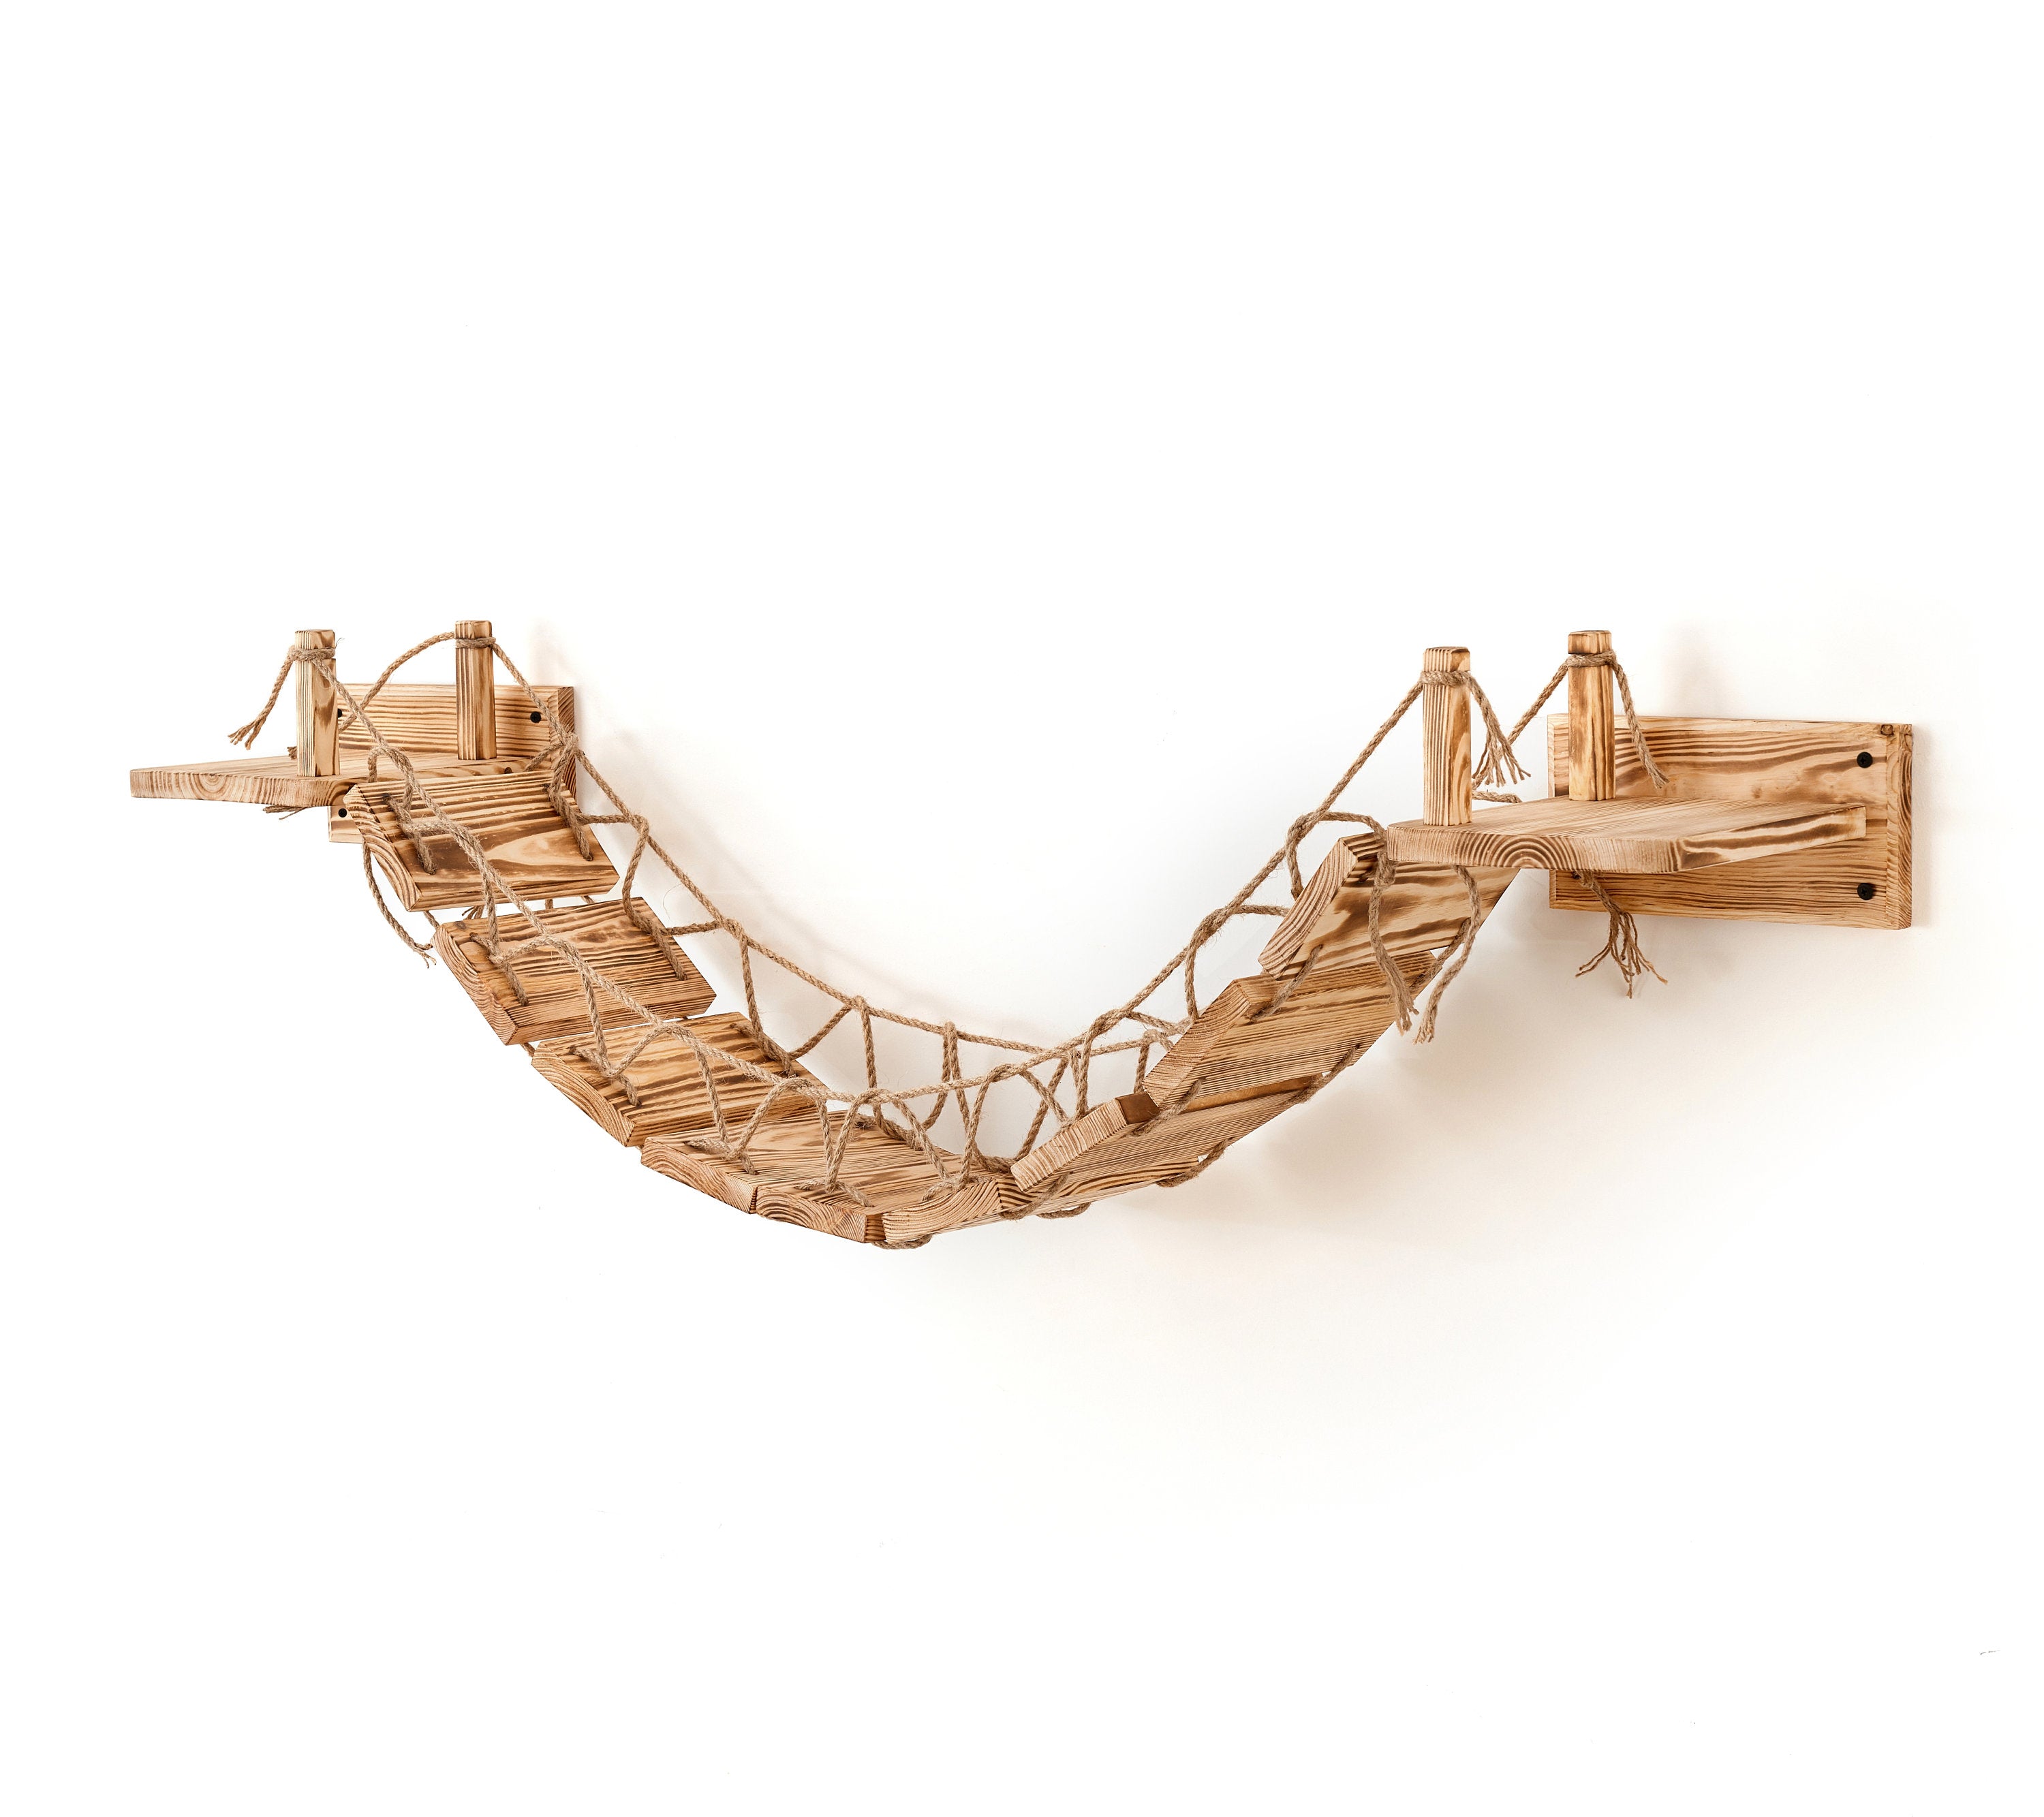 Large Wall Mounted Cat Bridge Platform With Side Ropes - Built Solid Wood And Strong Ropes - Wooden Cat Climbing Furniture